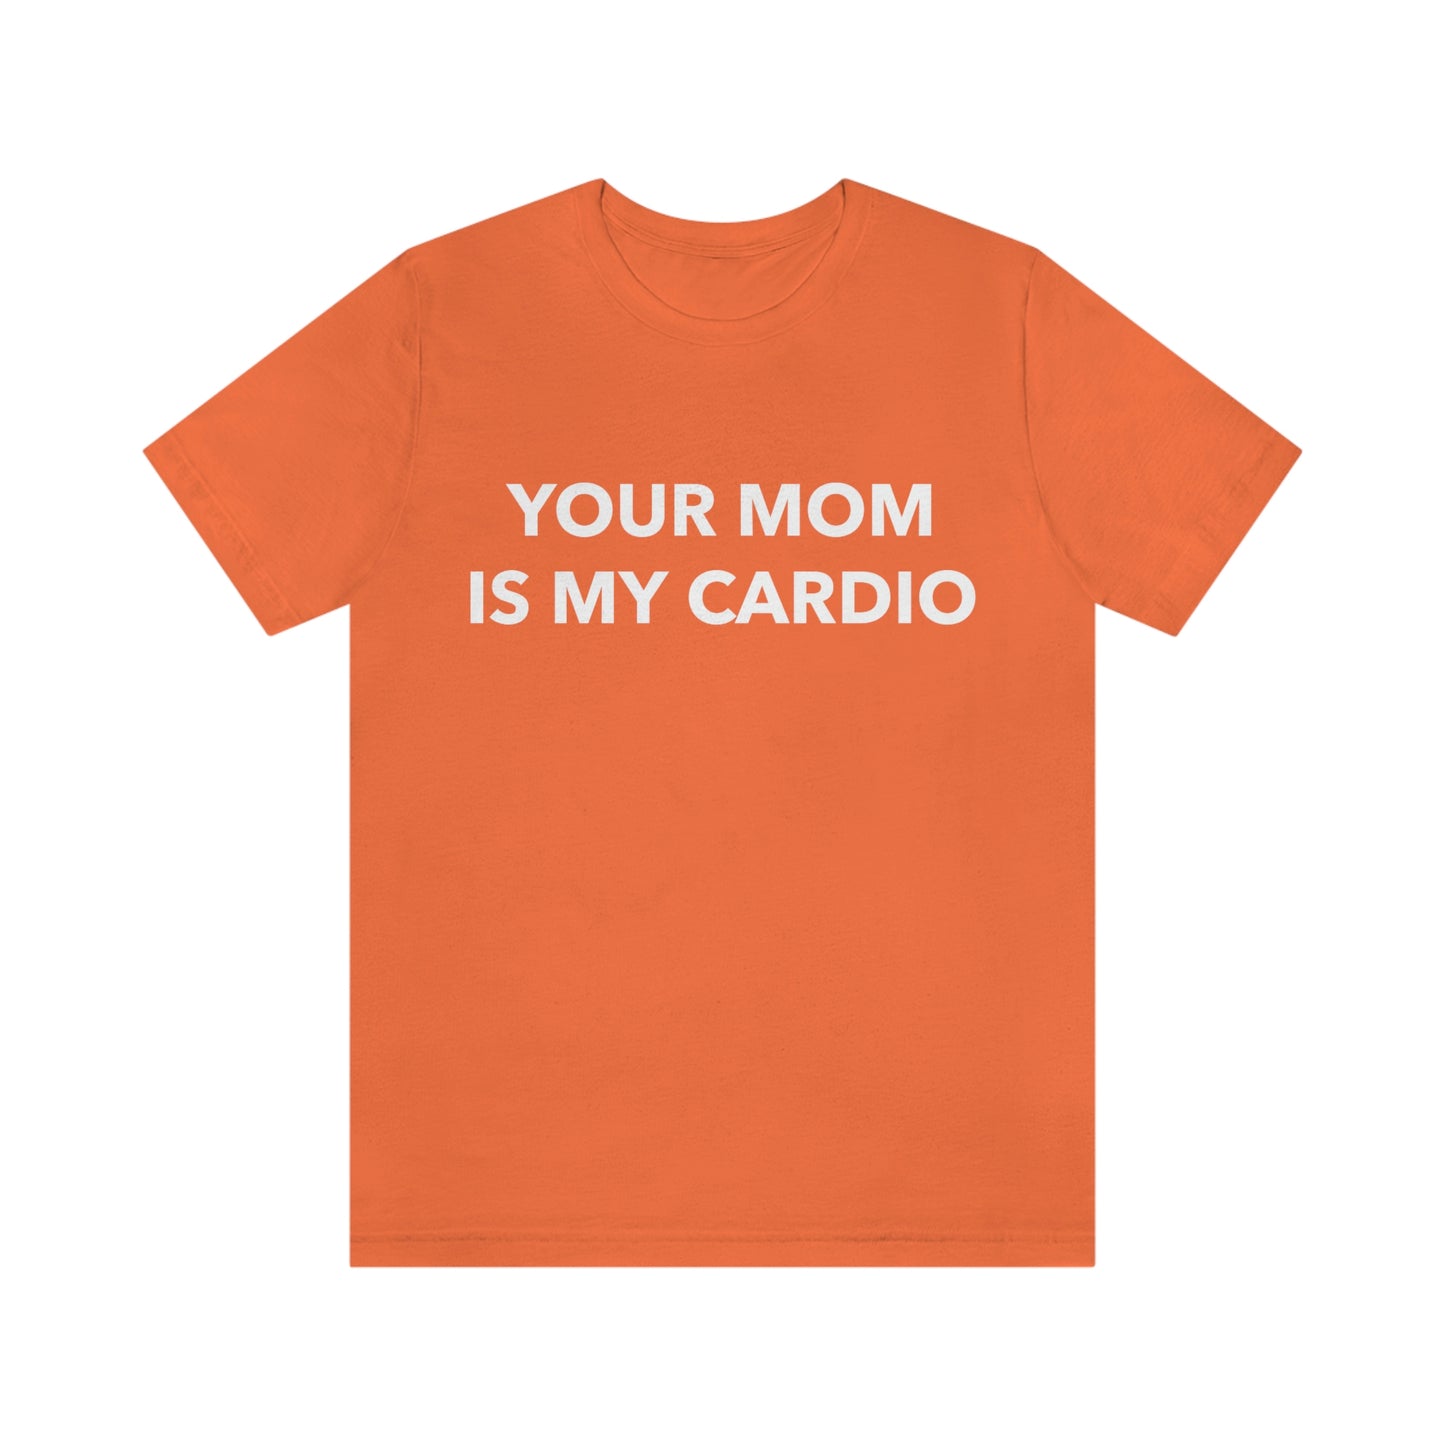 Your Mom Is My Cardio - Unisex T-Shirt